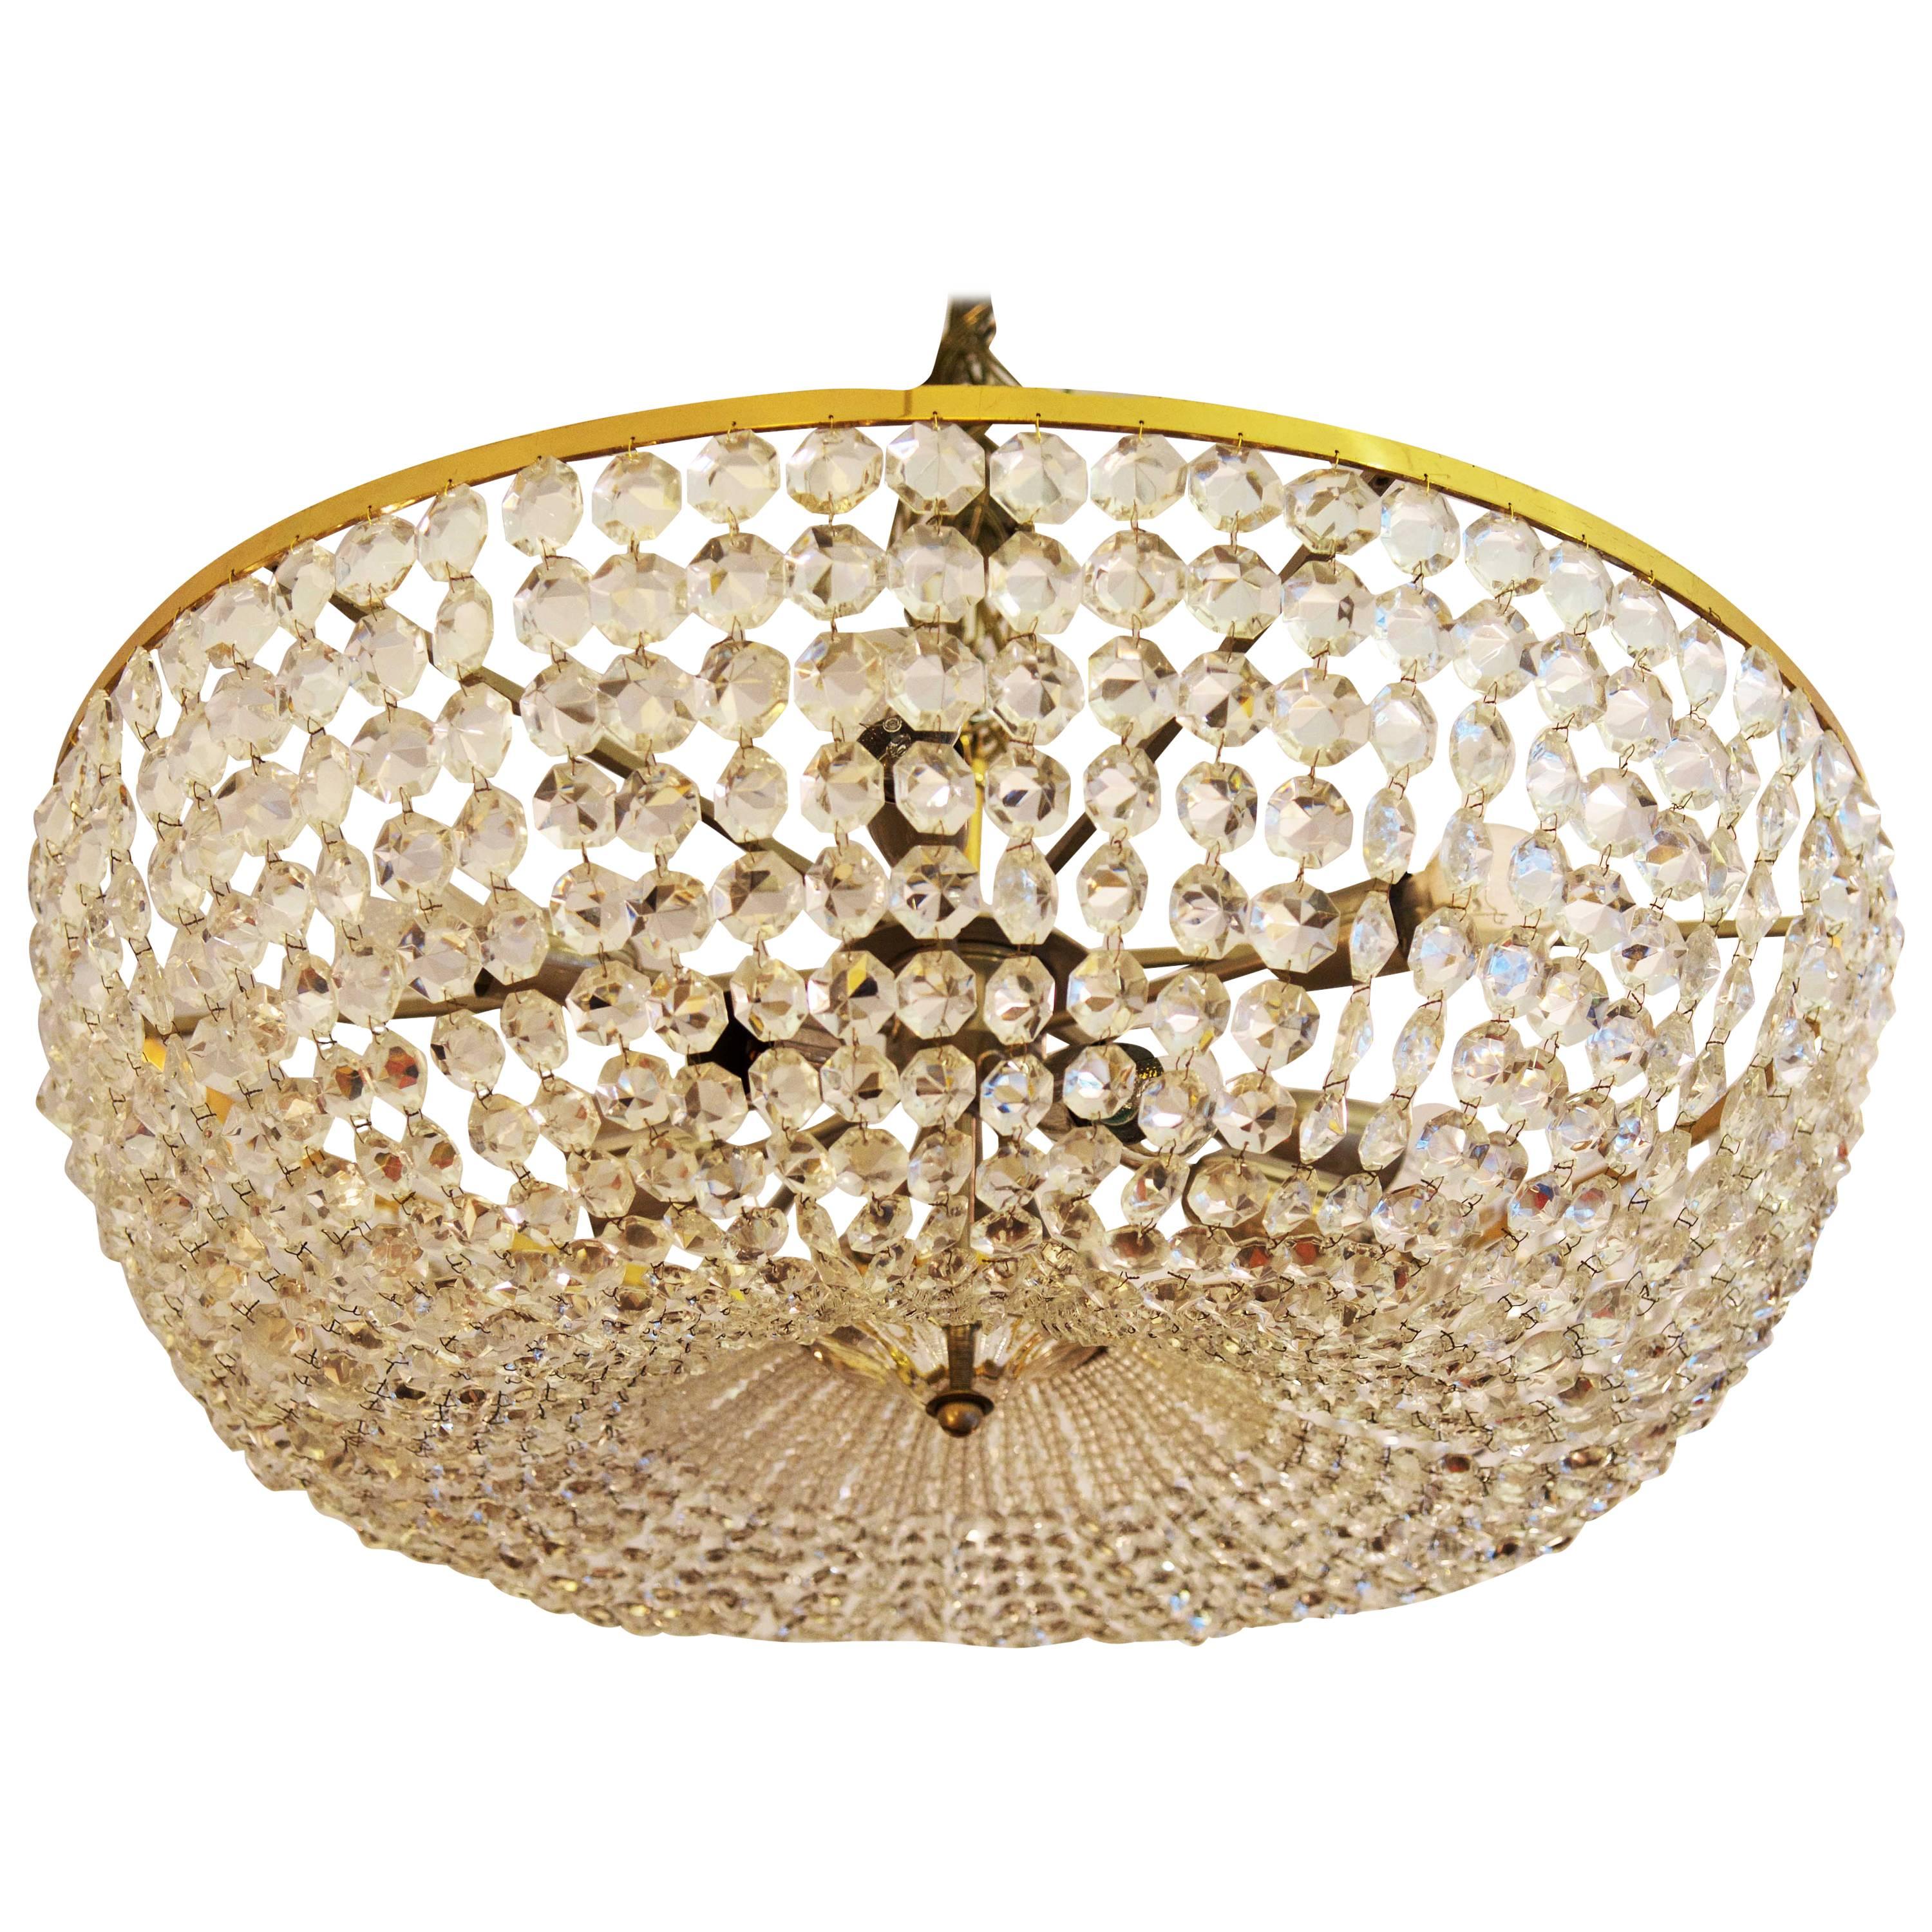 Spectacular Classical Basket Cut Crystal Chandelier by Bakalowits & Söhne